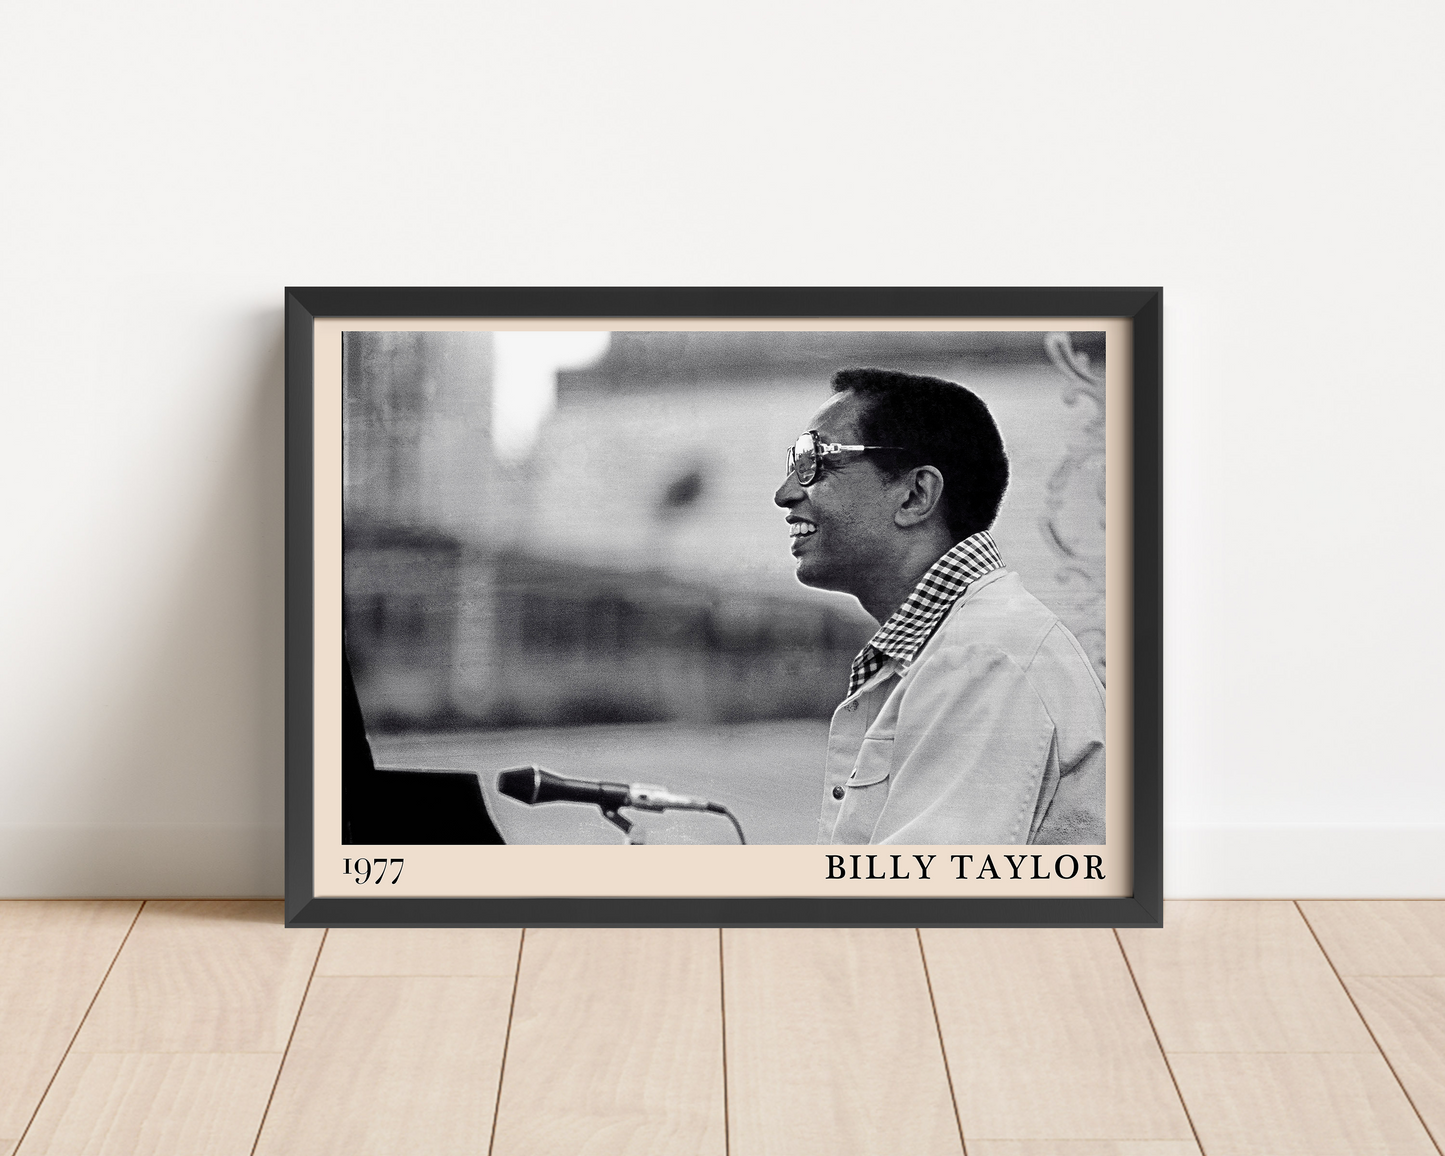 1977 photograph of Billy Taylor taken by Thomas Marcello. Picture crafted into a black framed poster, with an off-white border. Poster is propped against a white wall